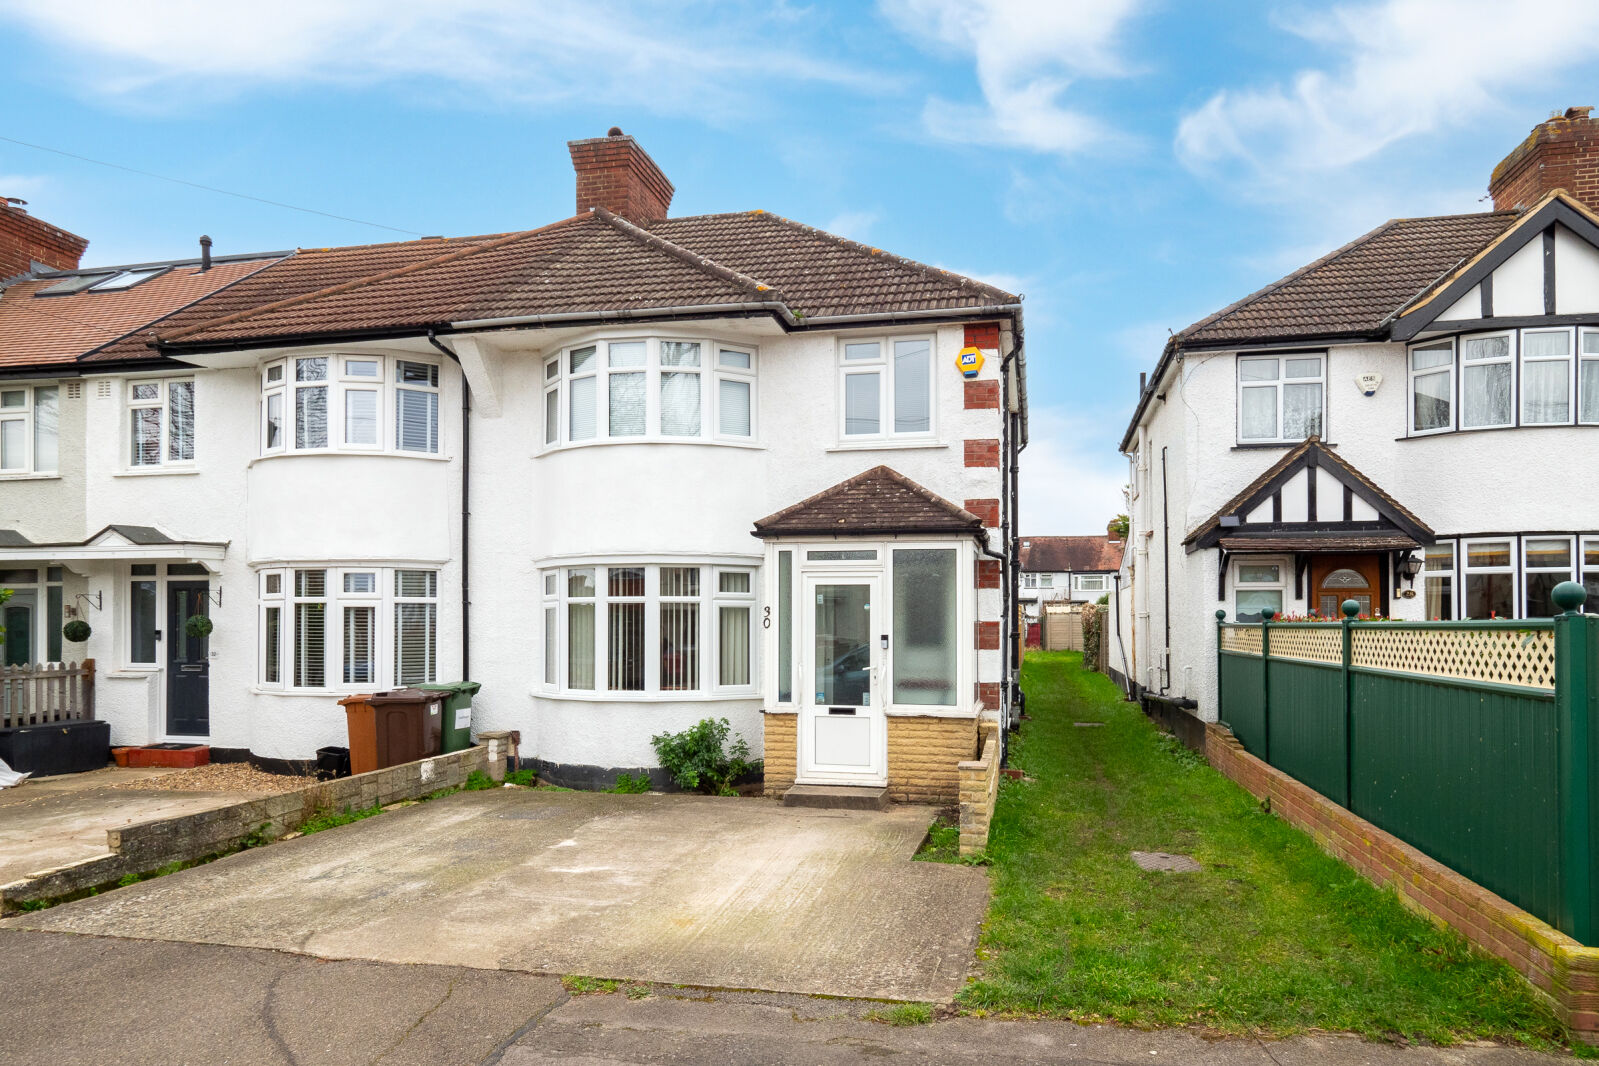 3 bedroom end terraced house for sale Kew Crescent, Cheam, SM3, main image